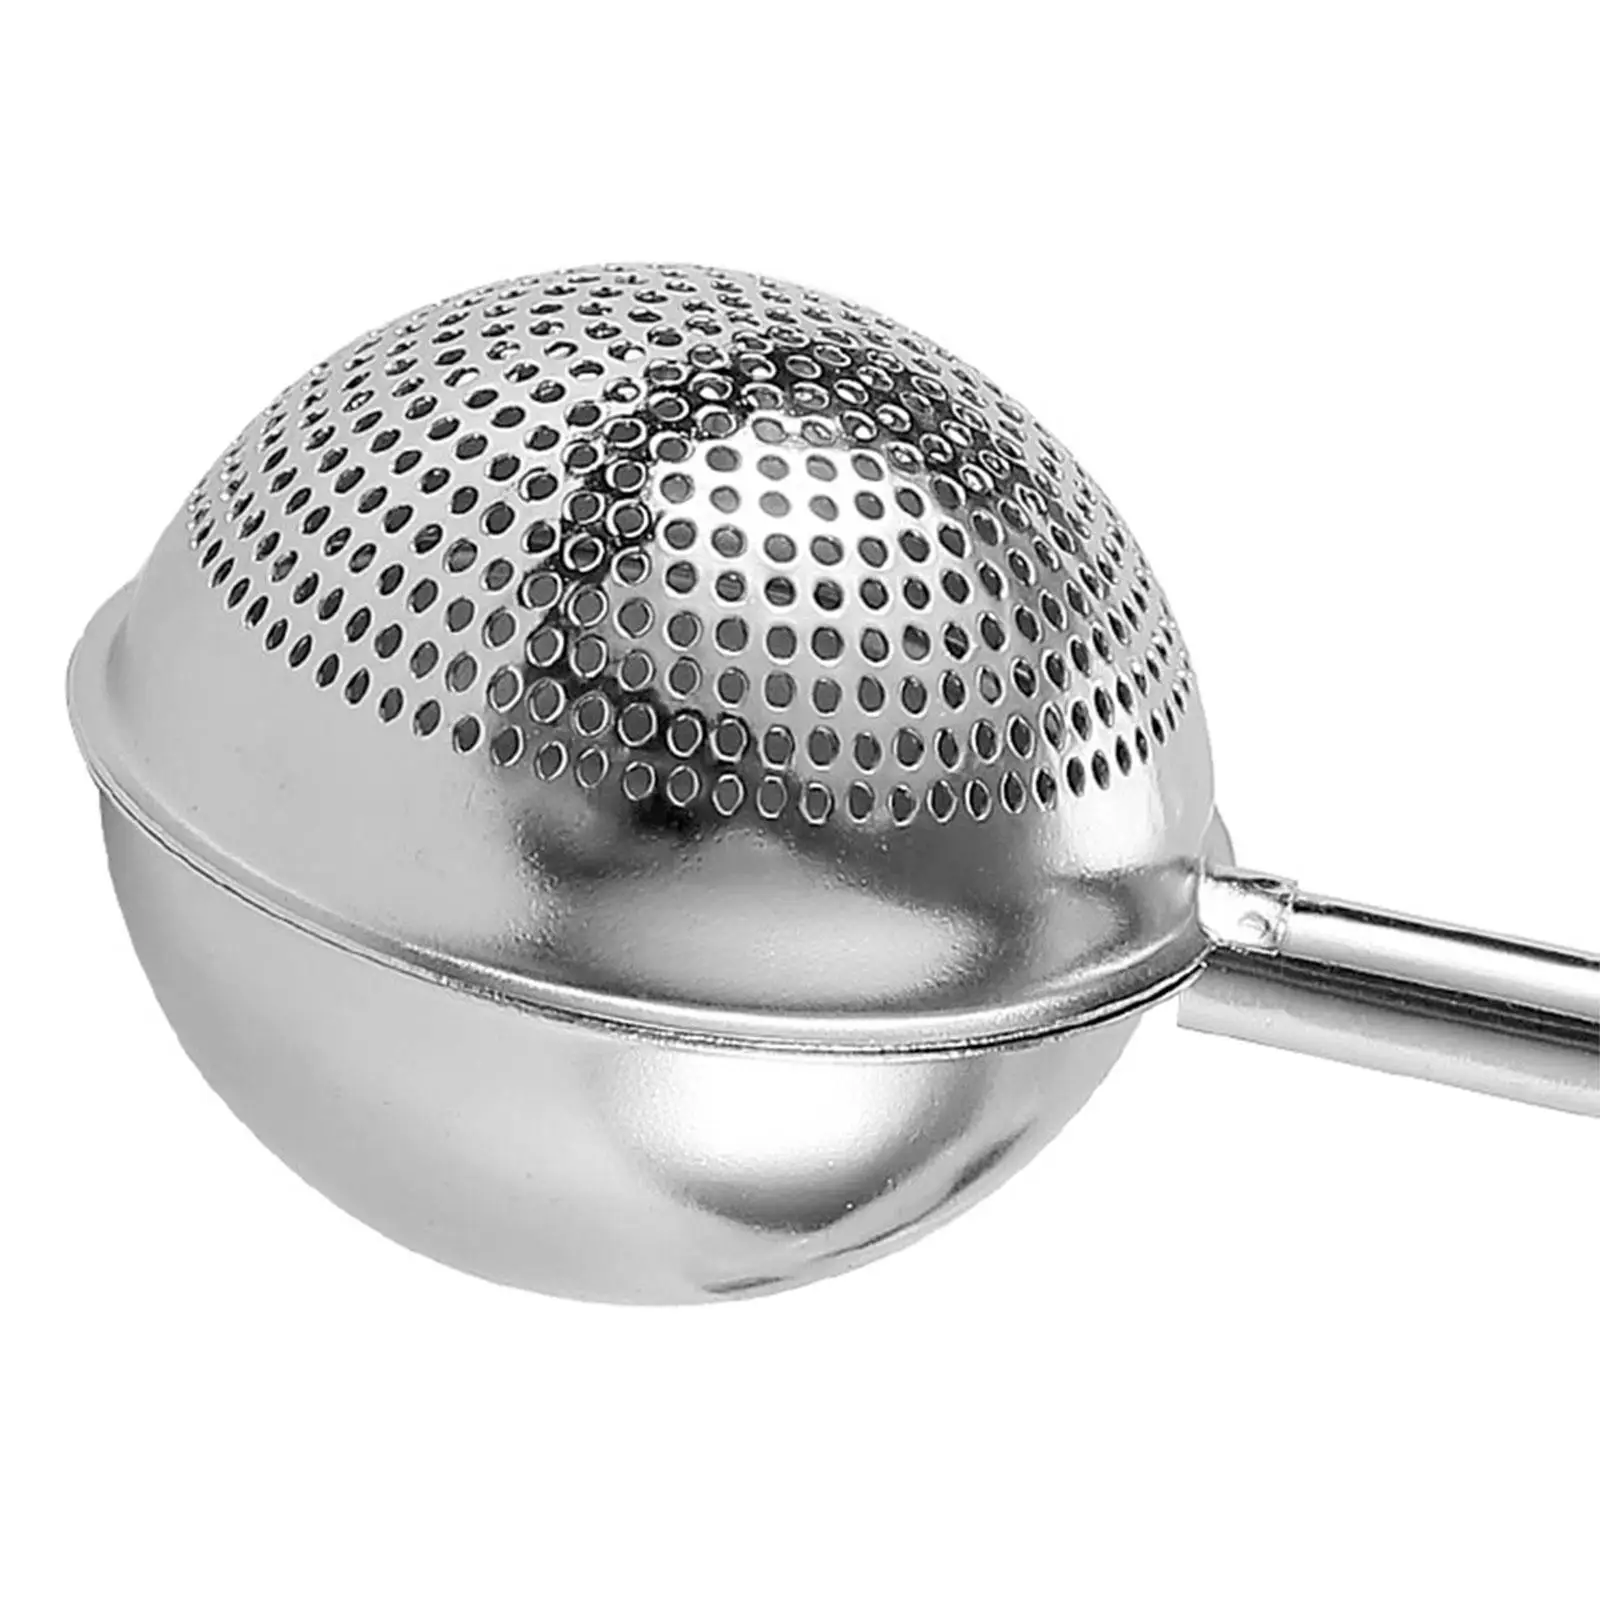 Stainless Steel Flour Sifter Manual Shaker Sugar Duster for Home Kitchen Tool